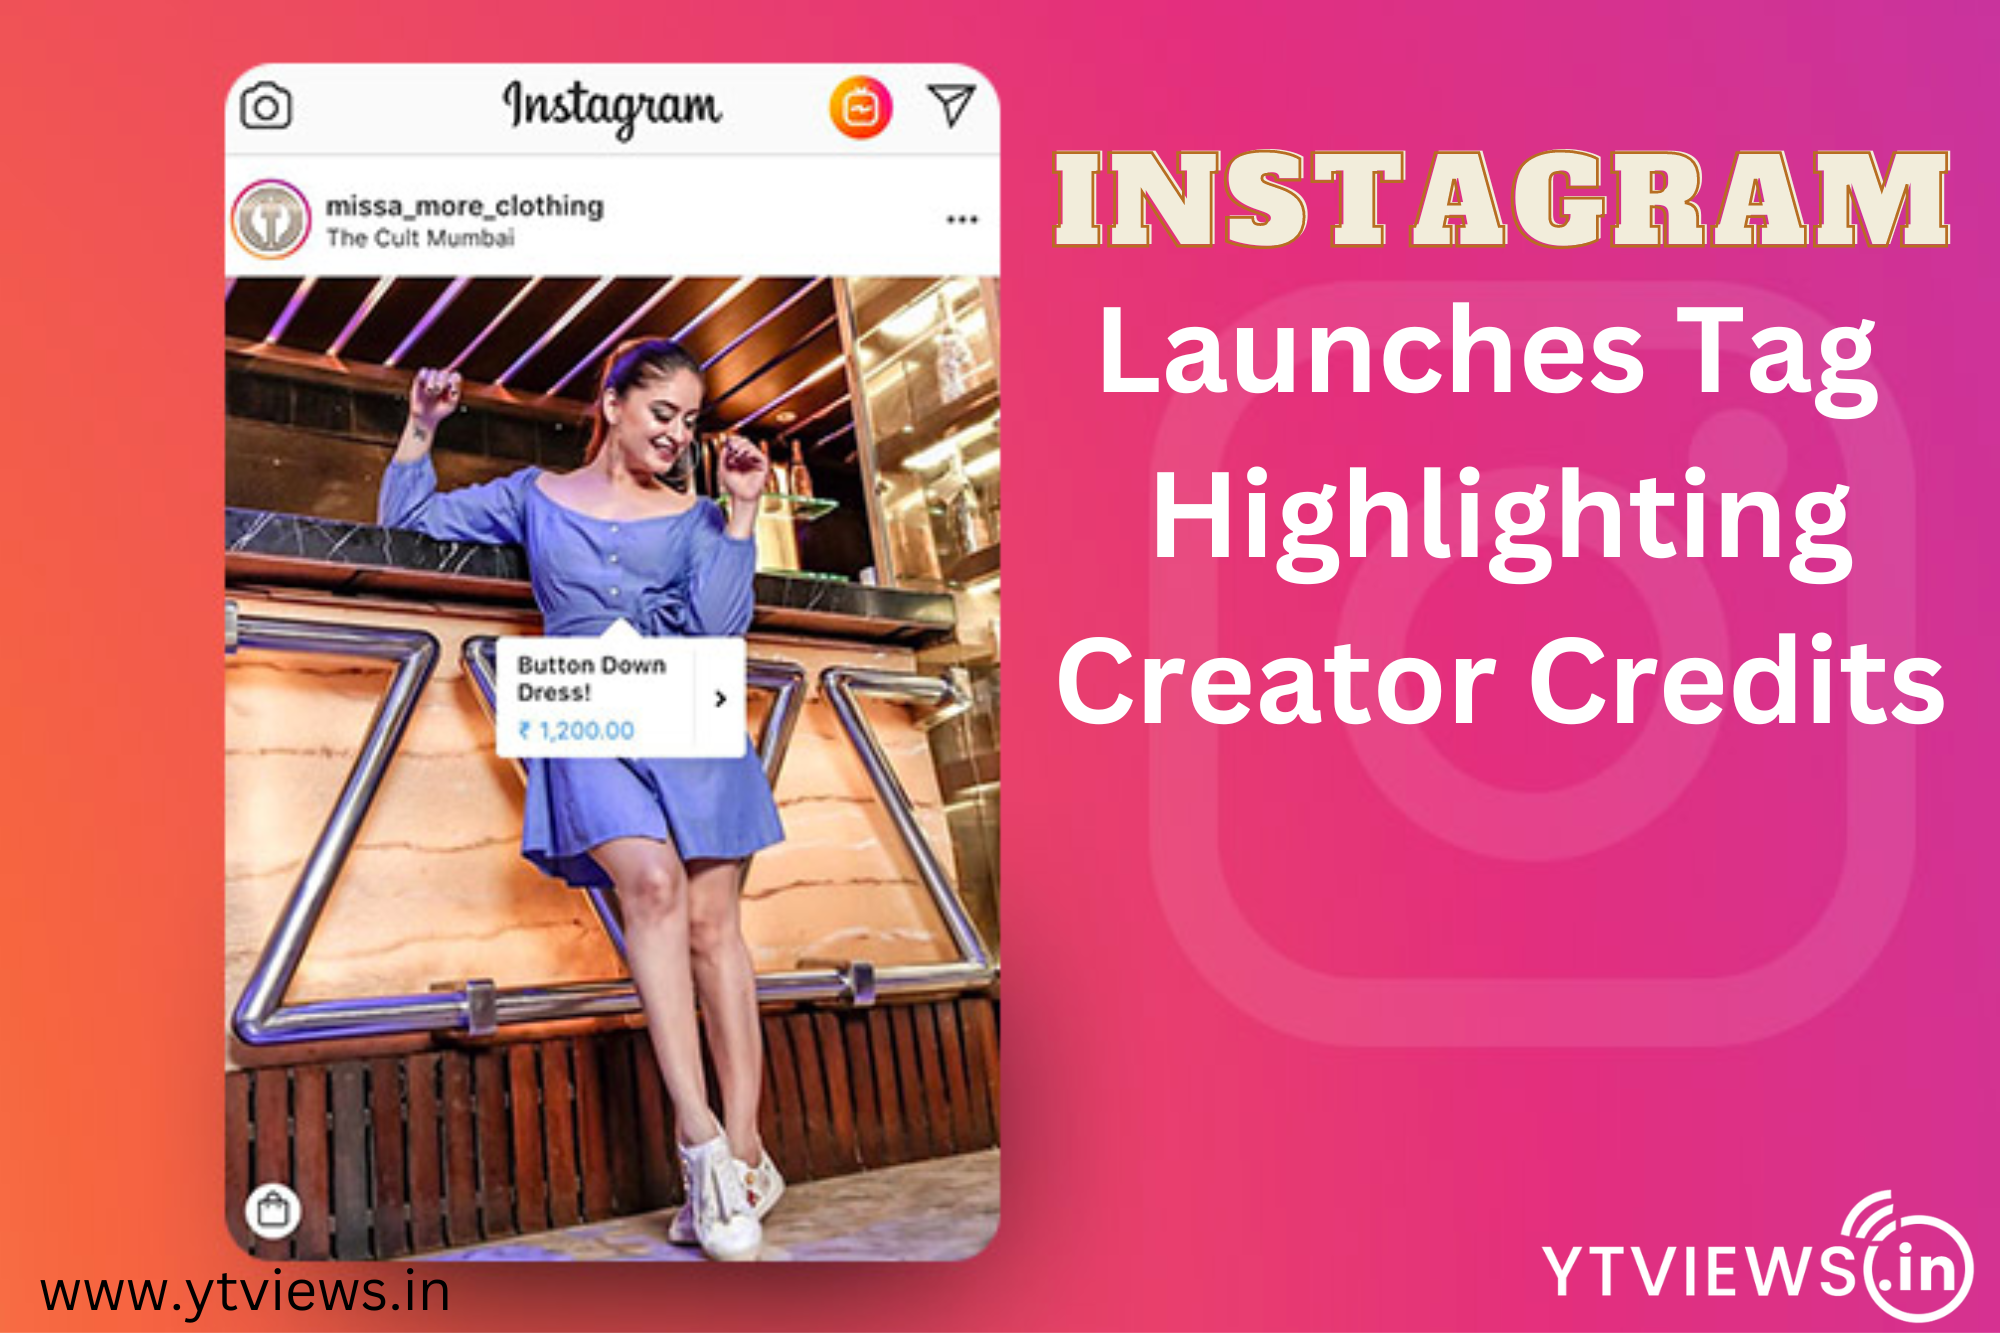 Instagram launches tags highlighting creator credits